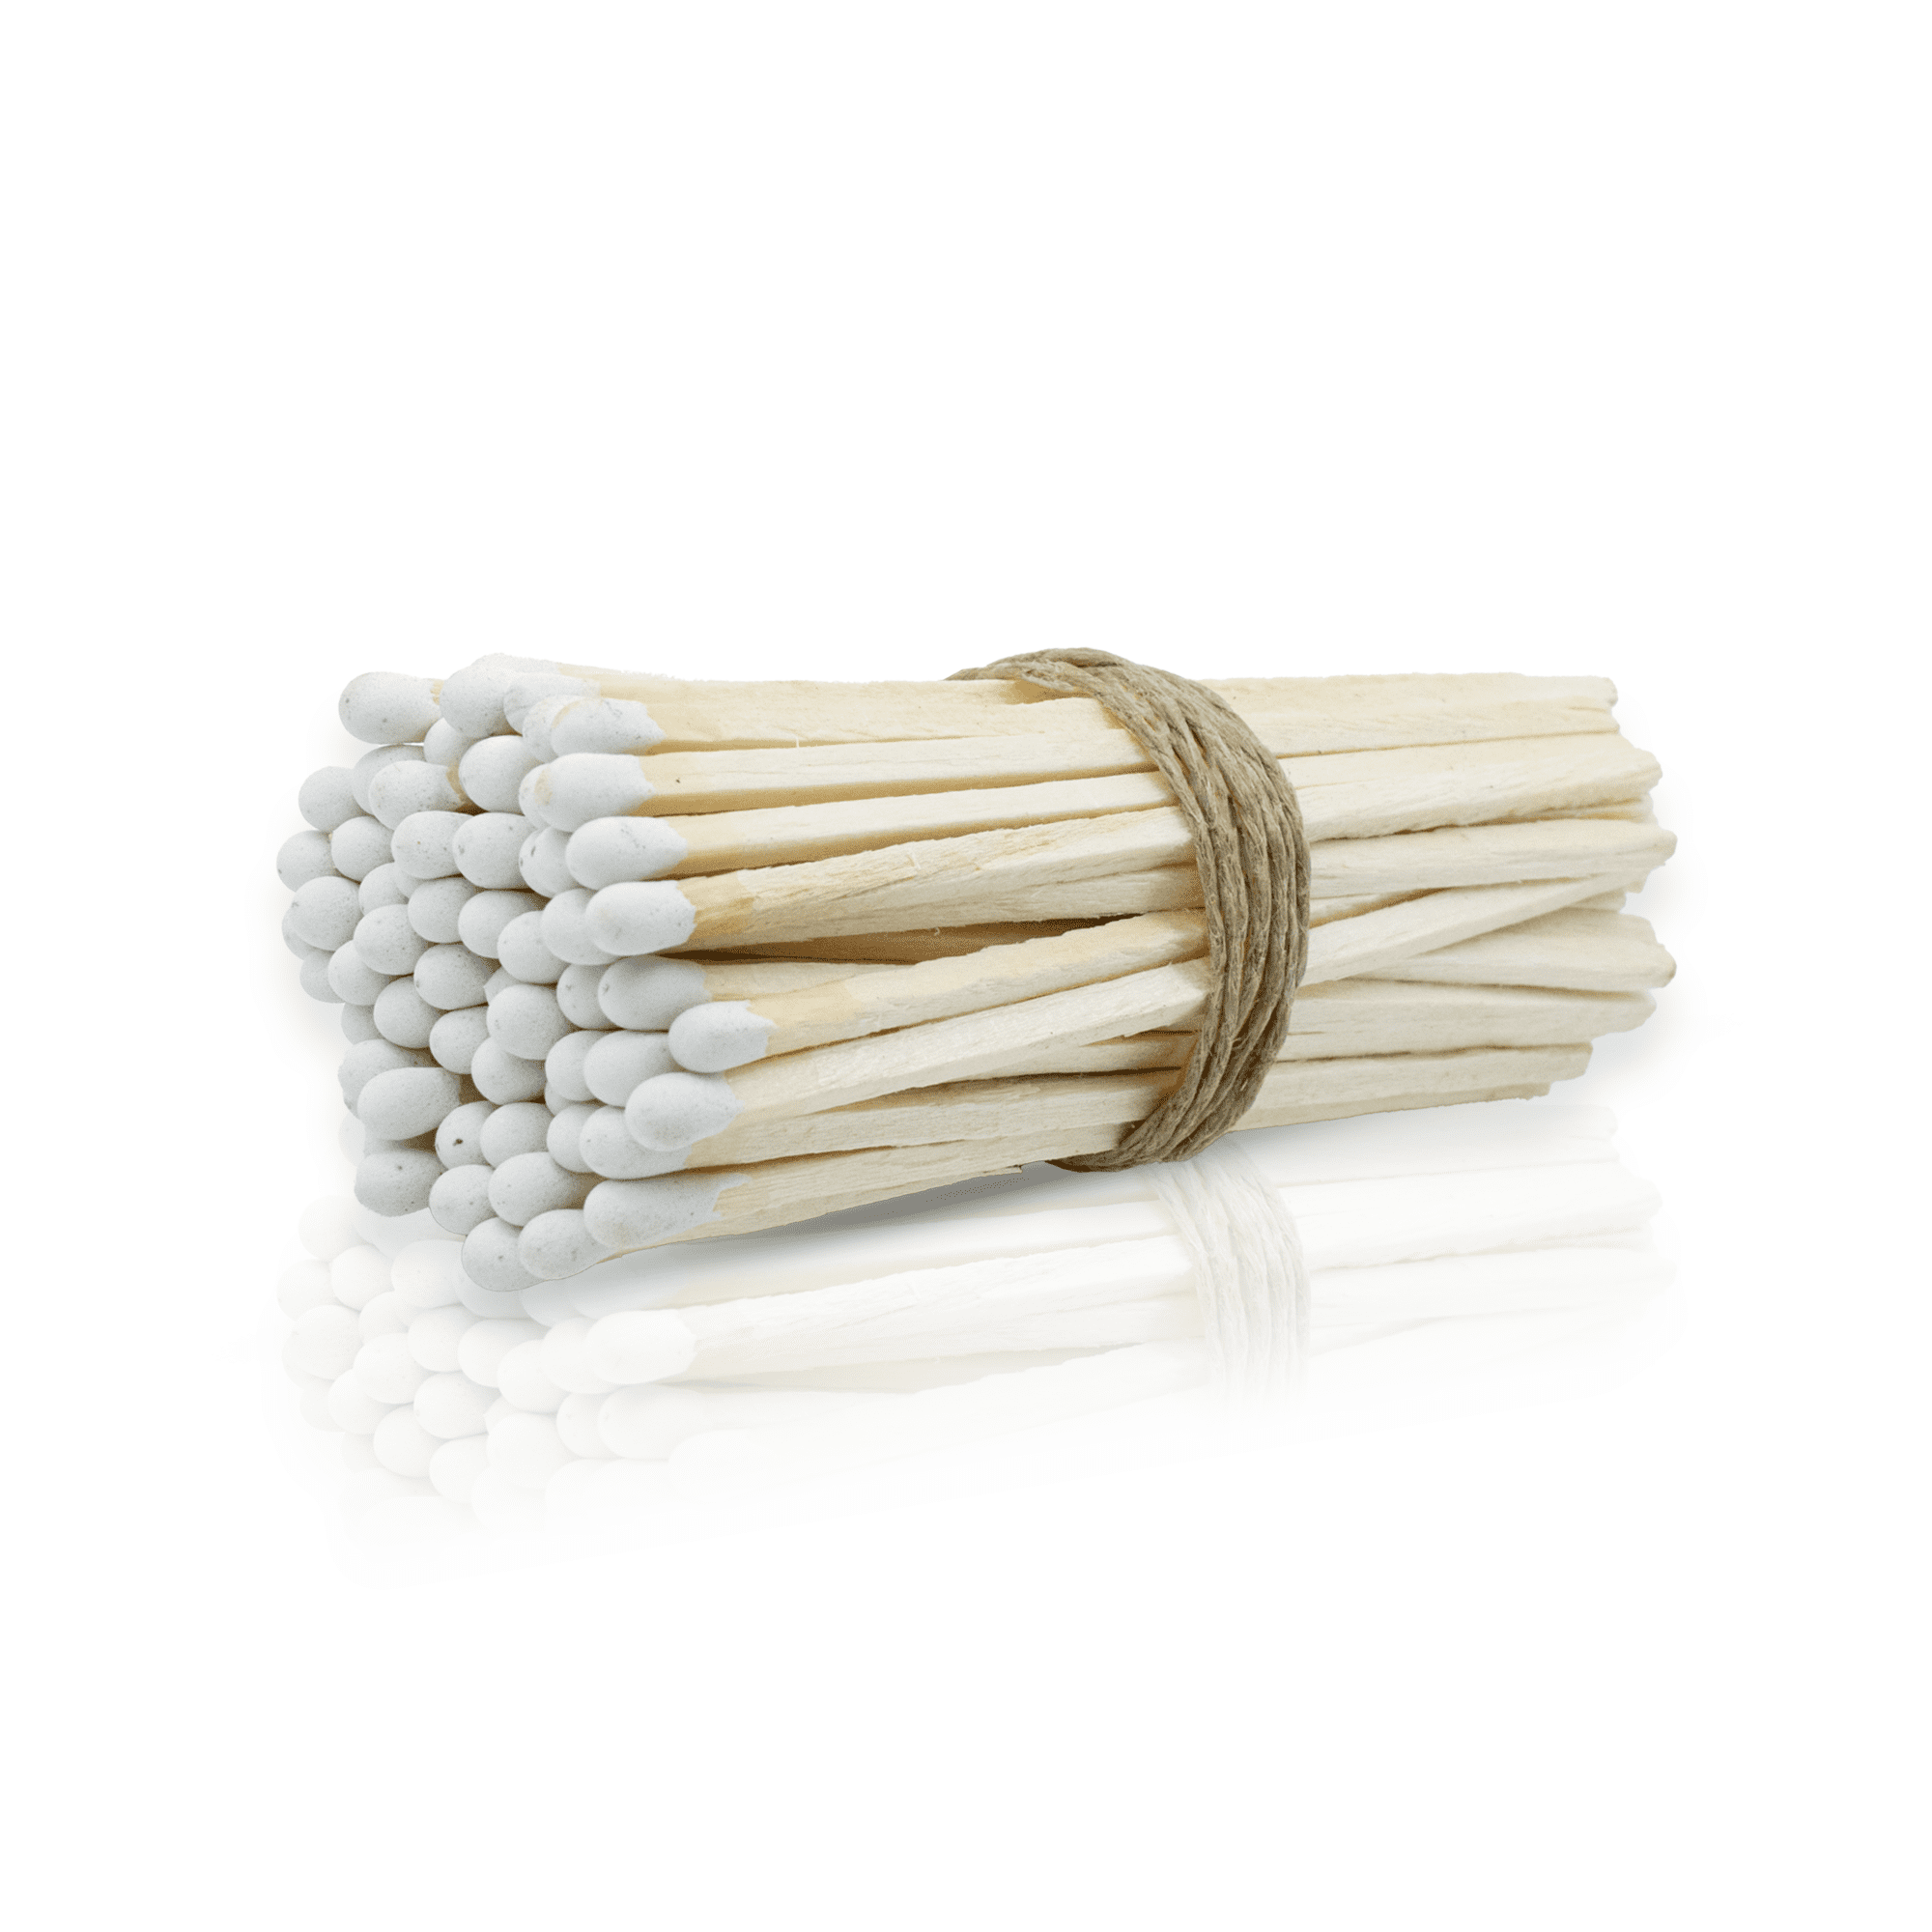 What are matches made of? There are two kinds of matchstick made of paper  and wood. The wooden matchstick is usually …